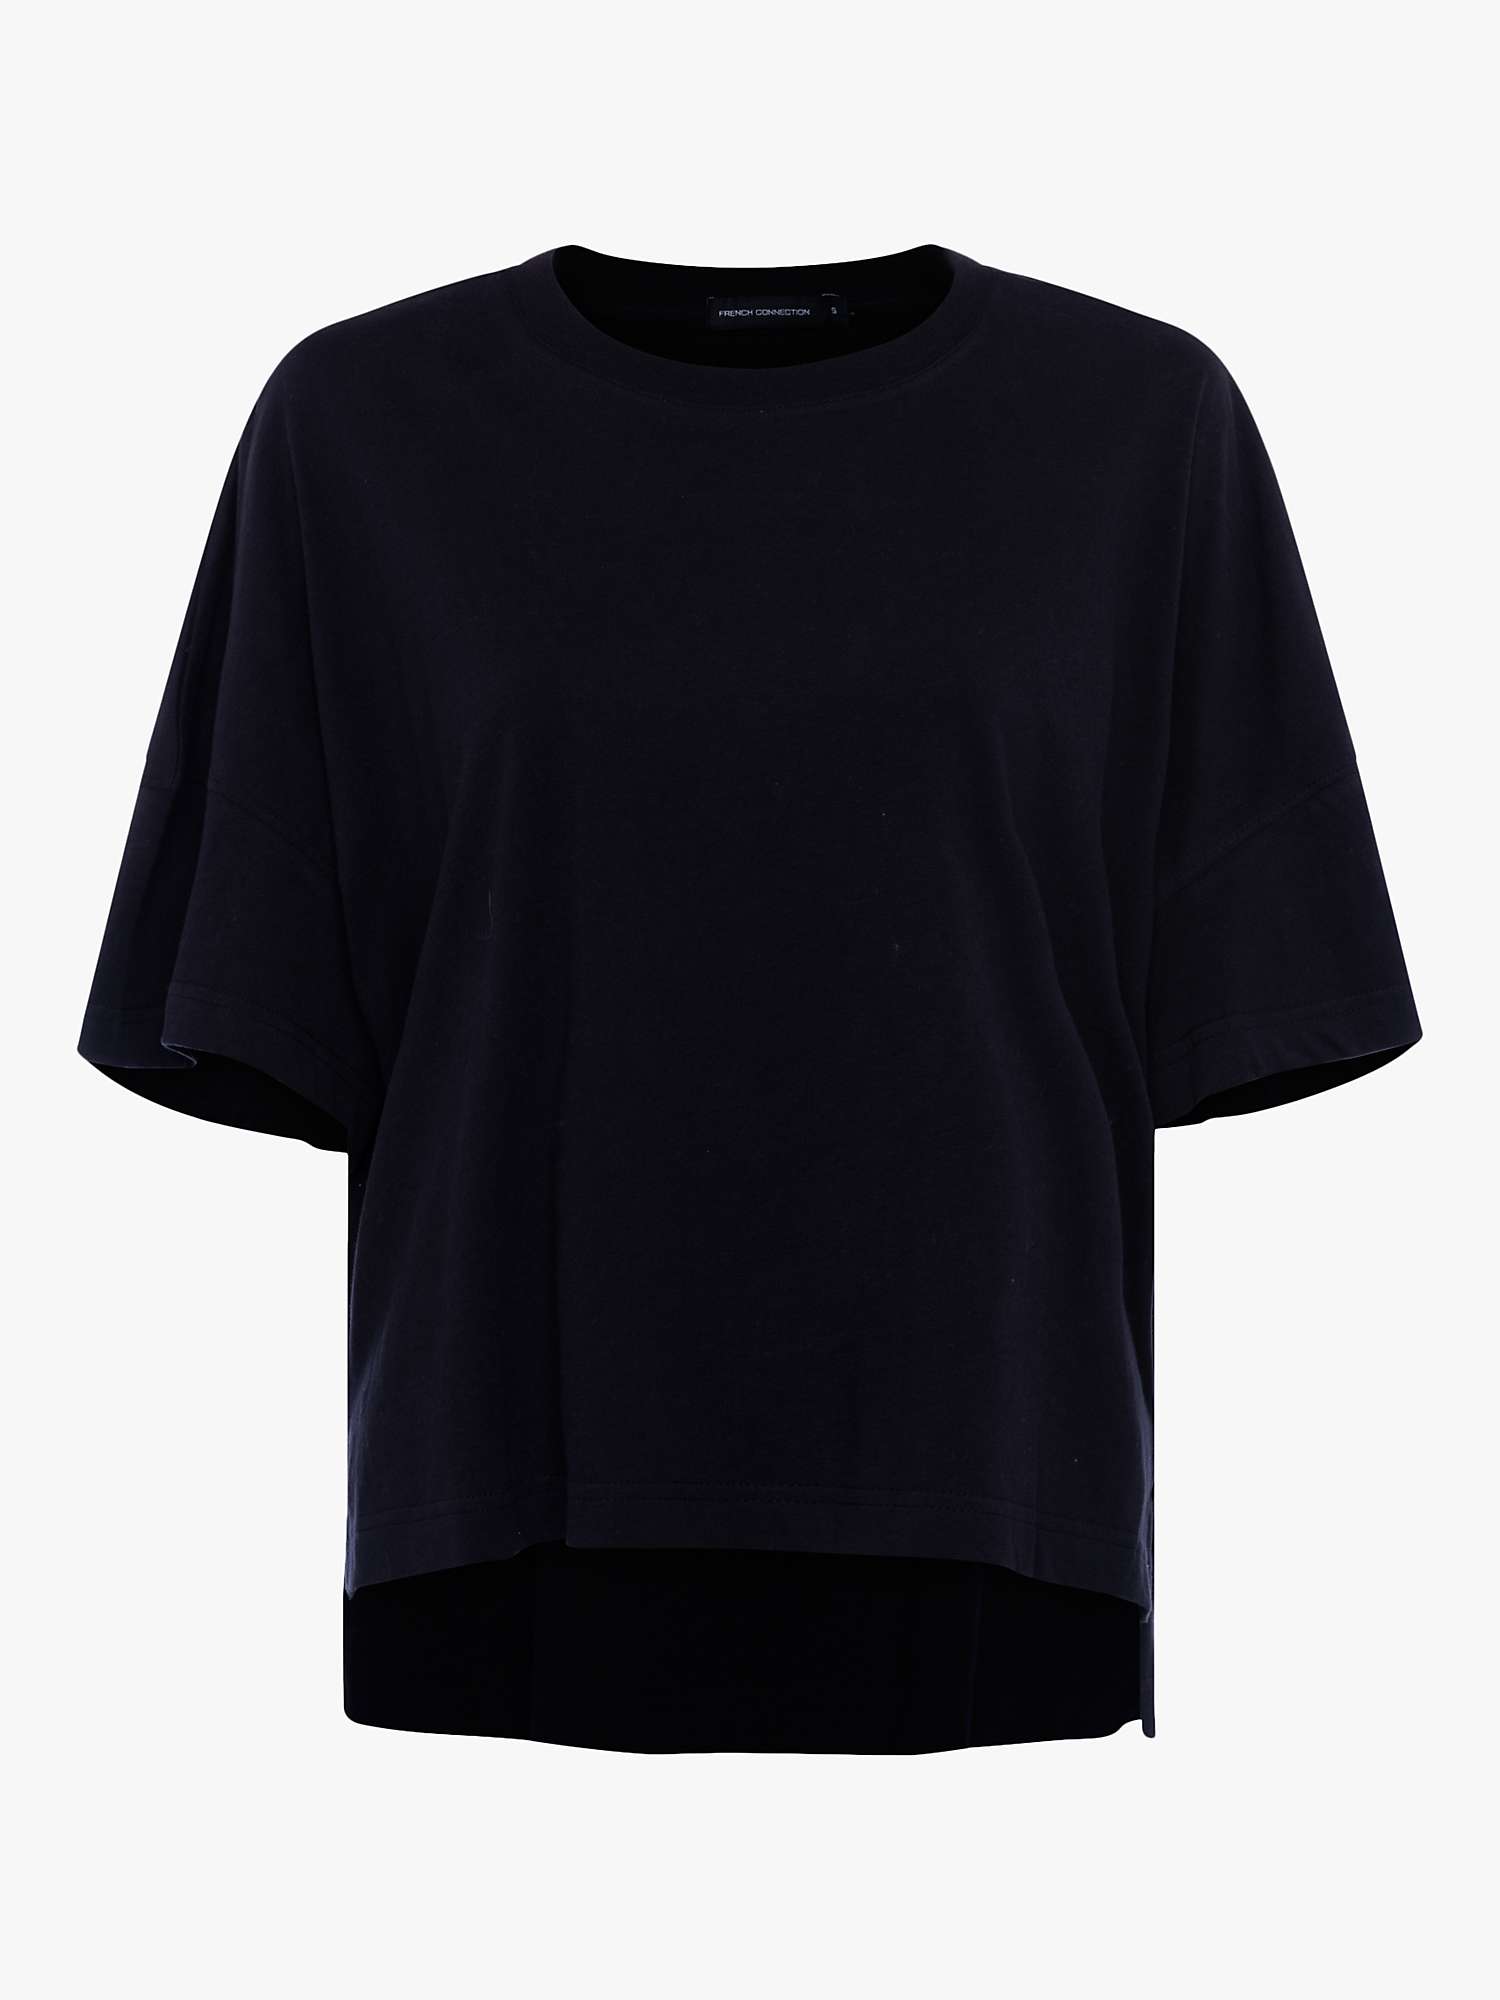 Buy French Connection Tally Organic Cotton T-Shirt Online at johnlewis.com